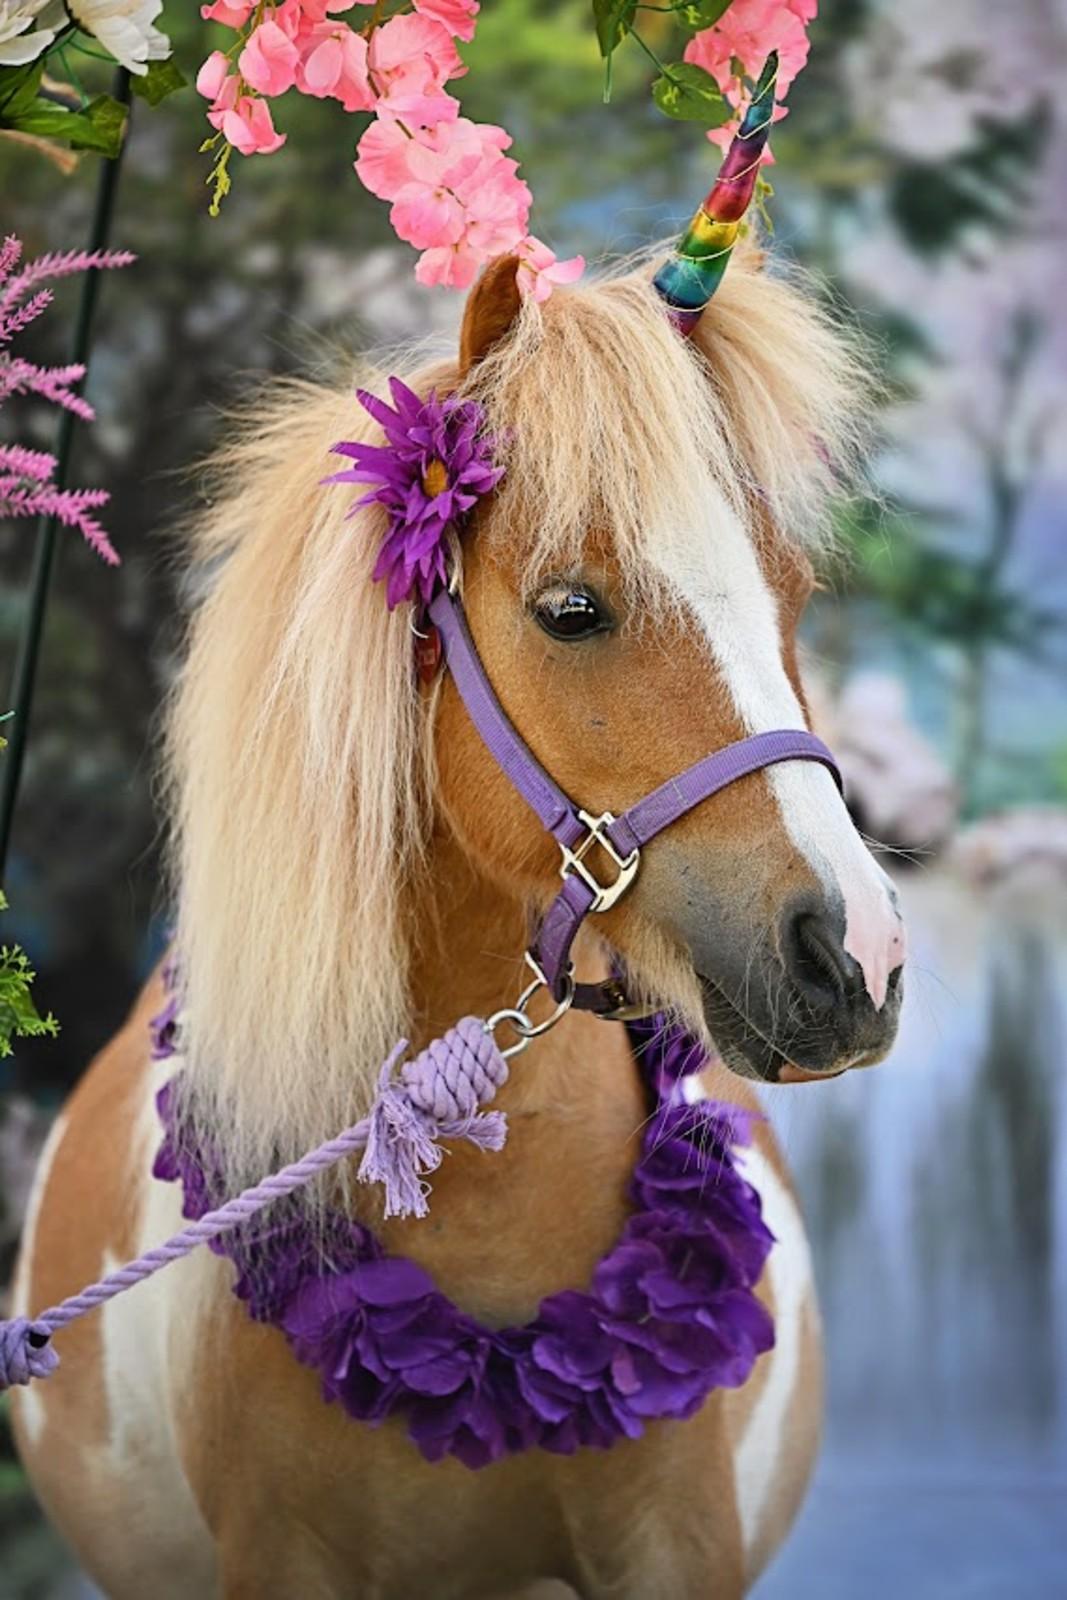 Learn how to care for a unicorn, braid it's mane and go for a ride!